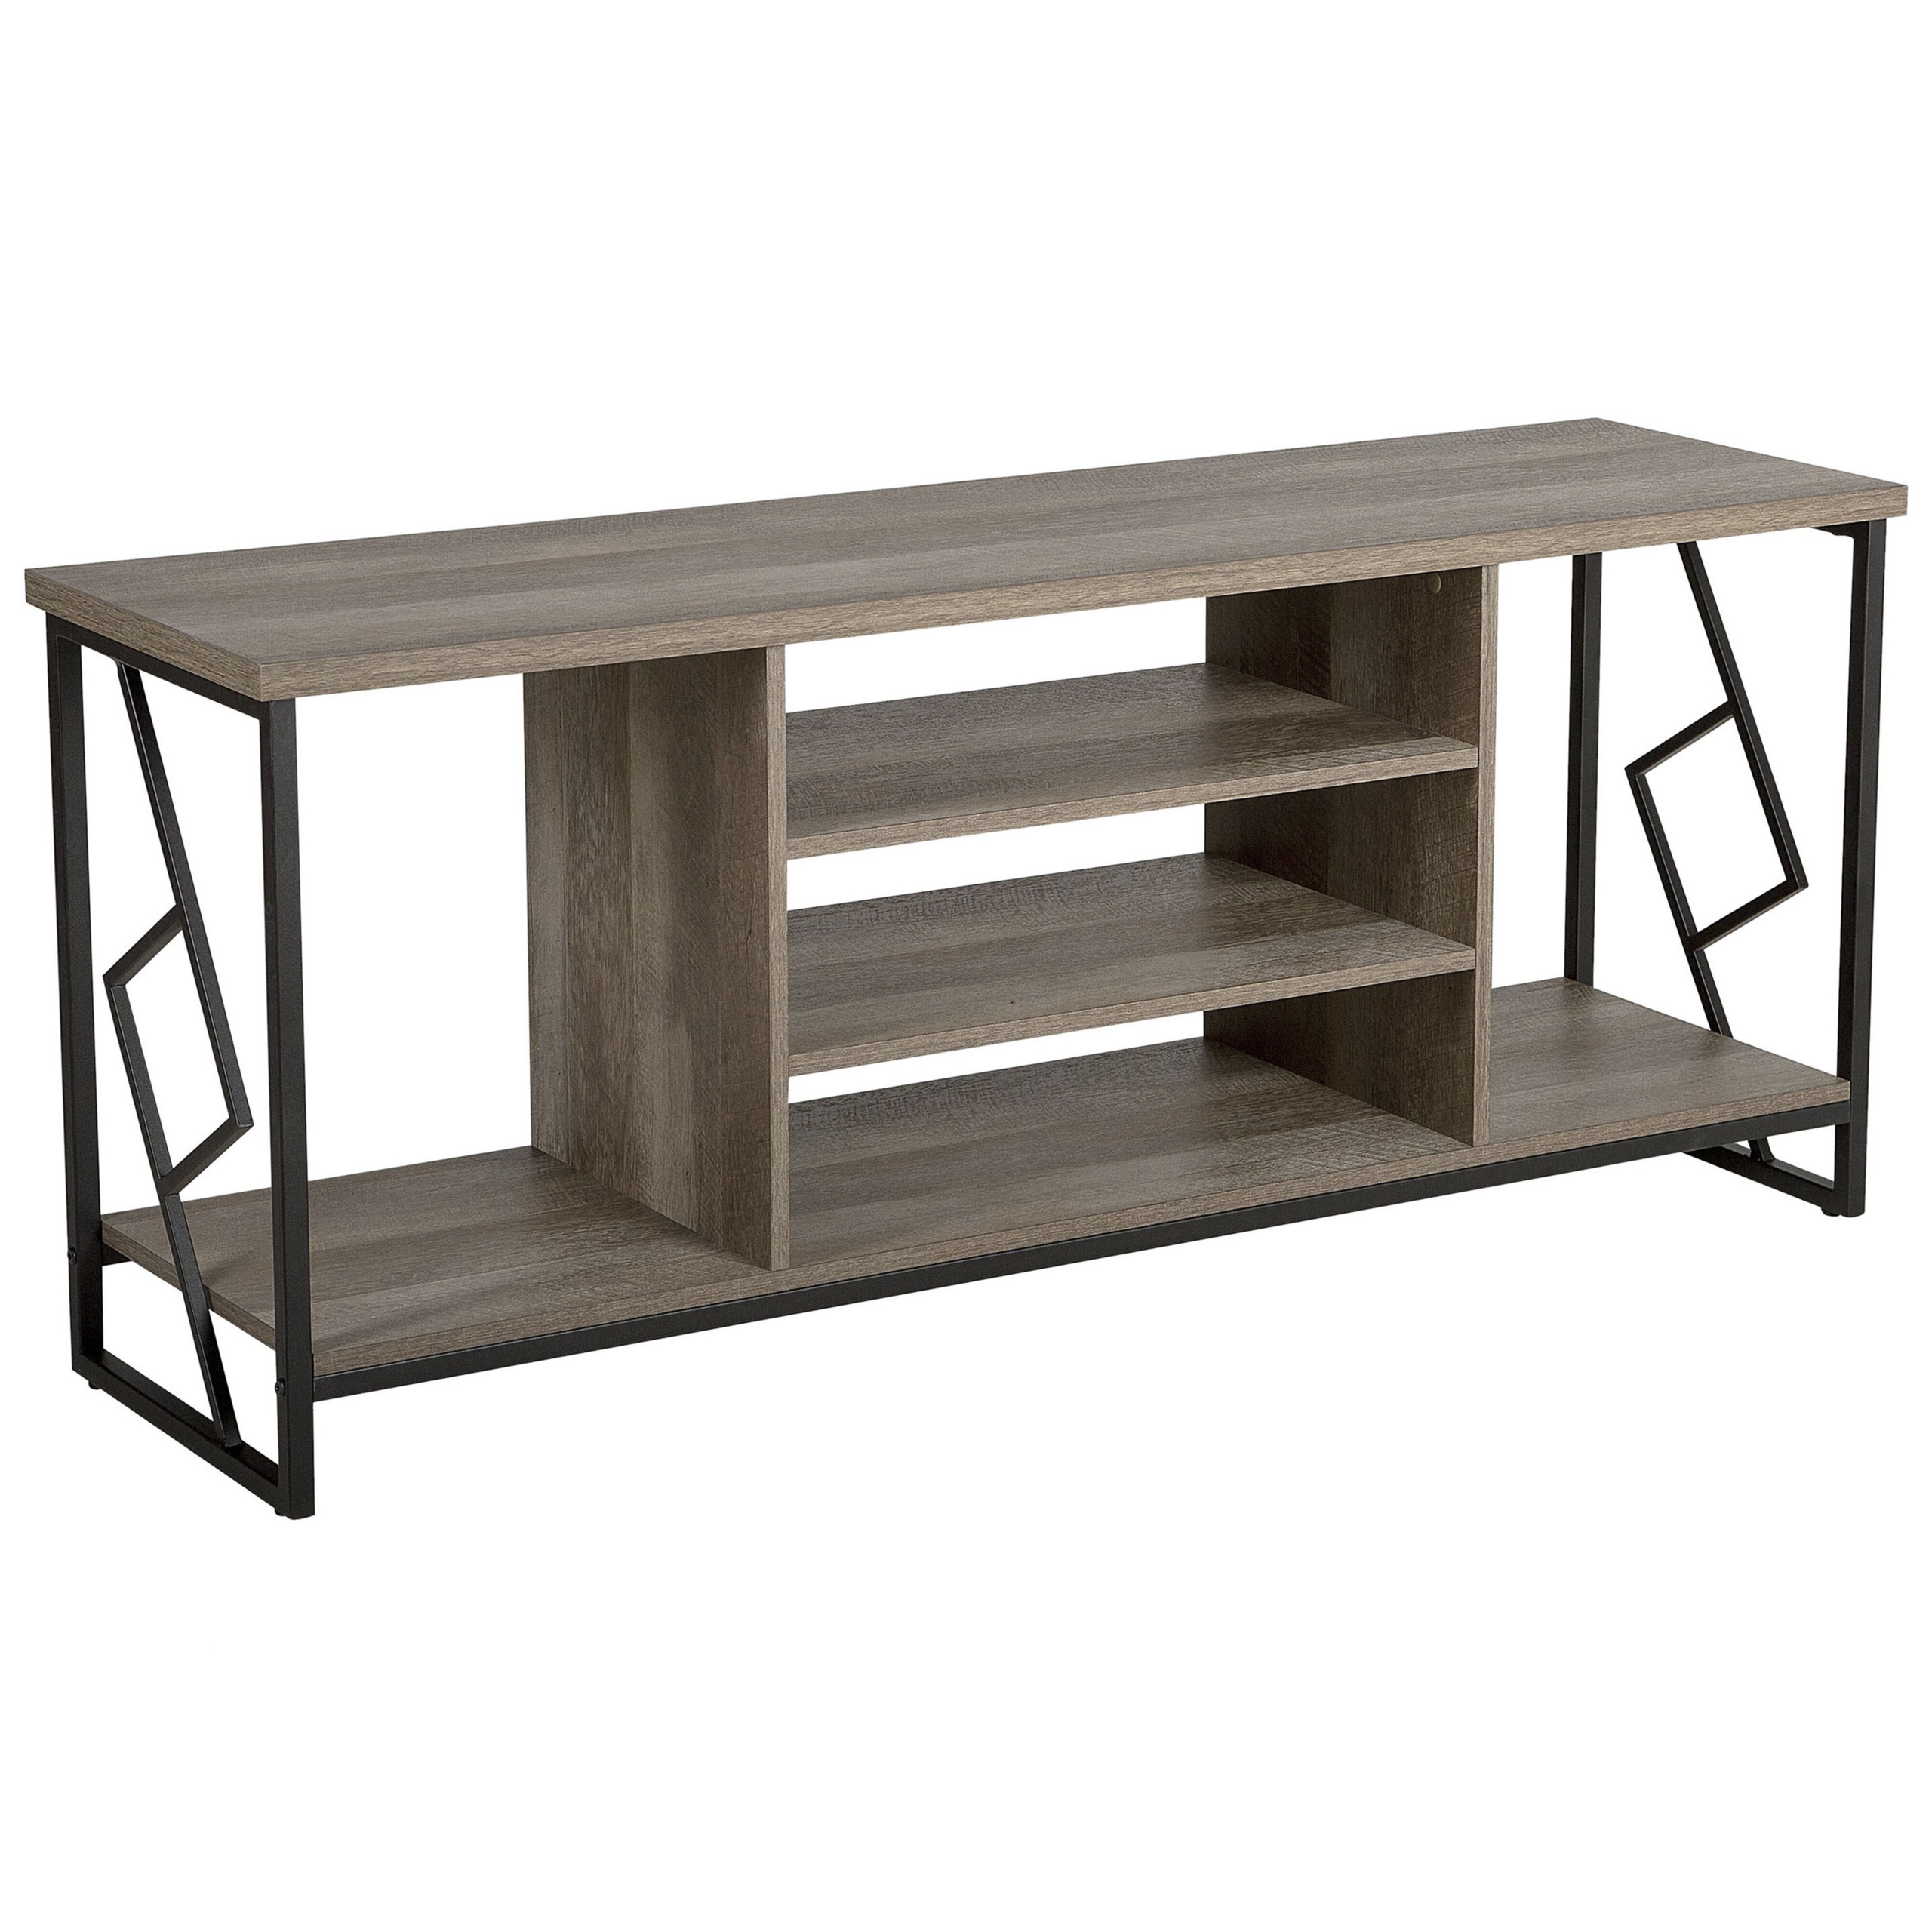 Beliani TV Stand Dark Wood Finish for up to 60ʺ TV Black Metal Frame Media Unit with Open Shelves Material:Chipboard Size:40x60x140